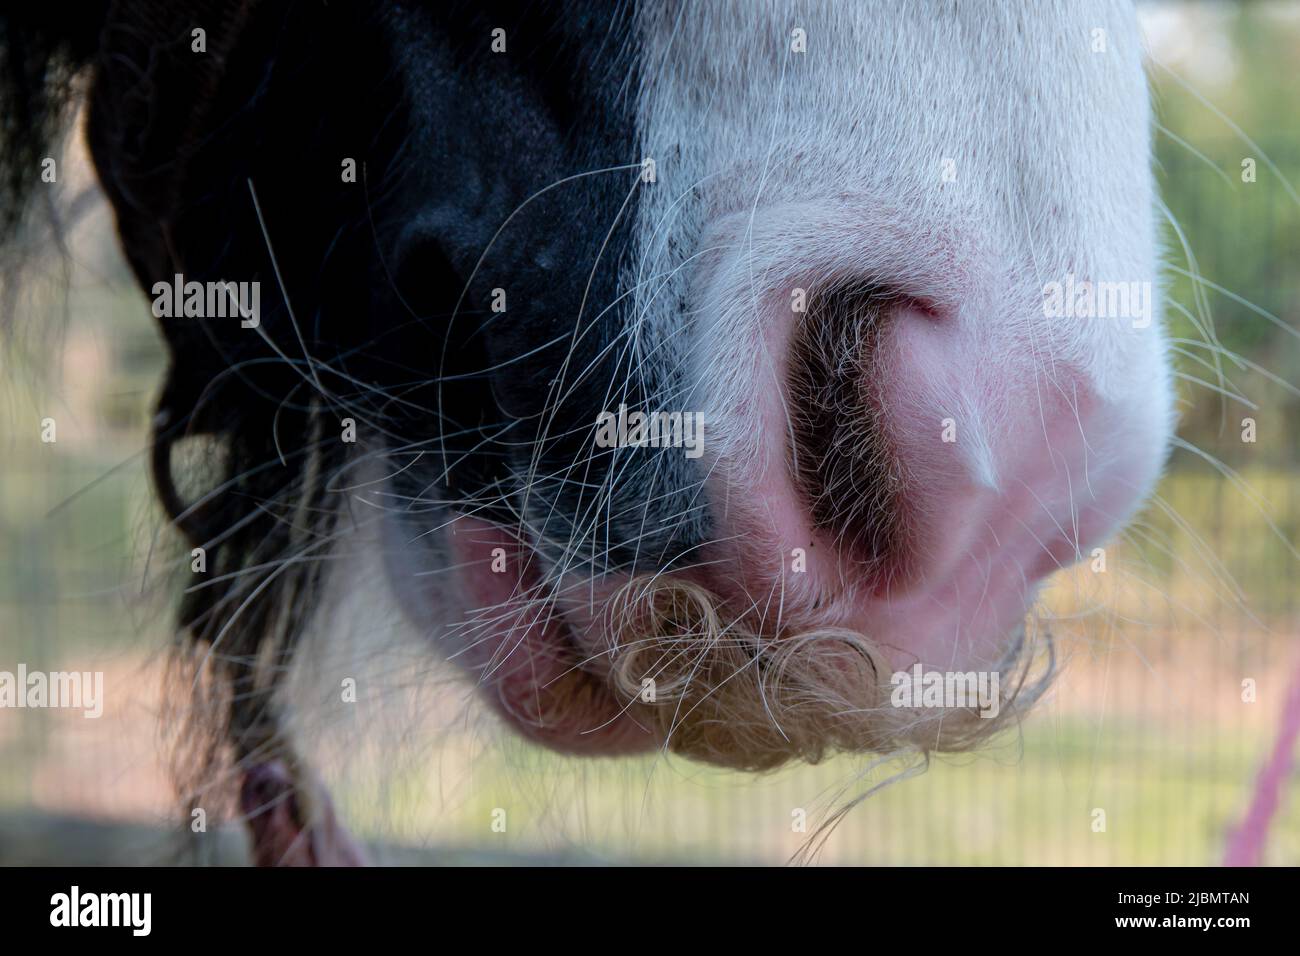 Close-up of gypsy cob horse face showing nostril, moustache and whiskers Stock Photo